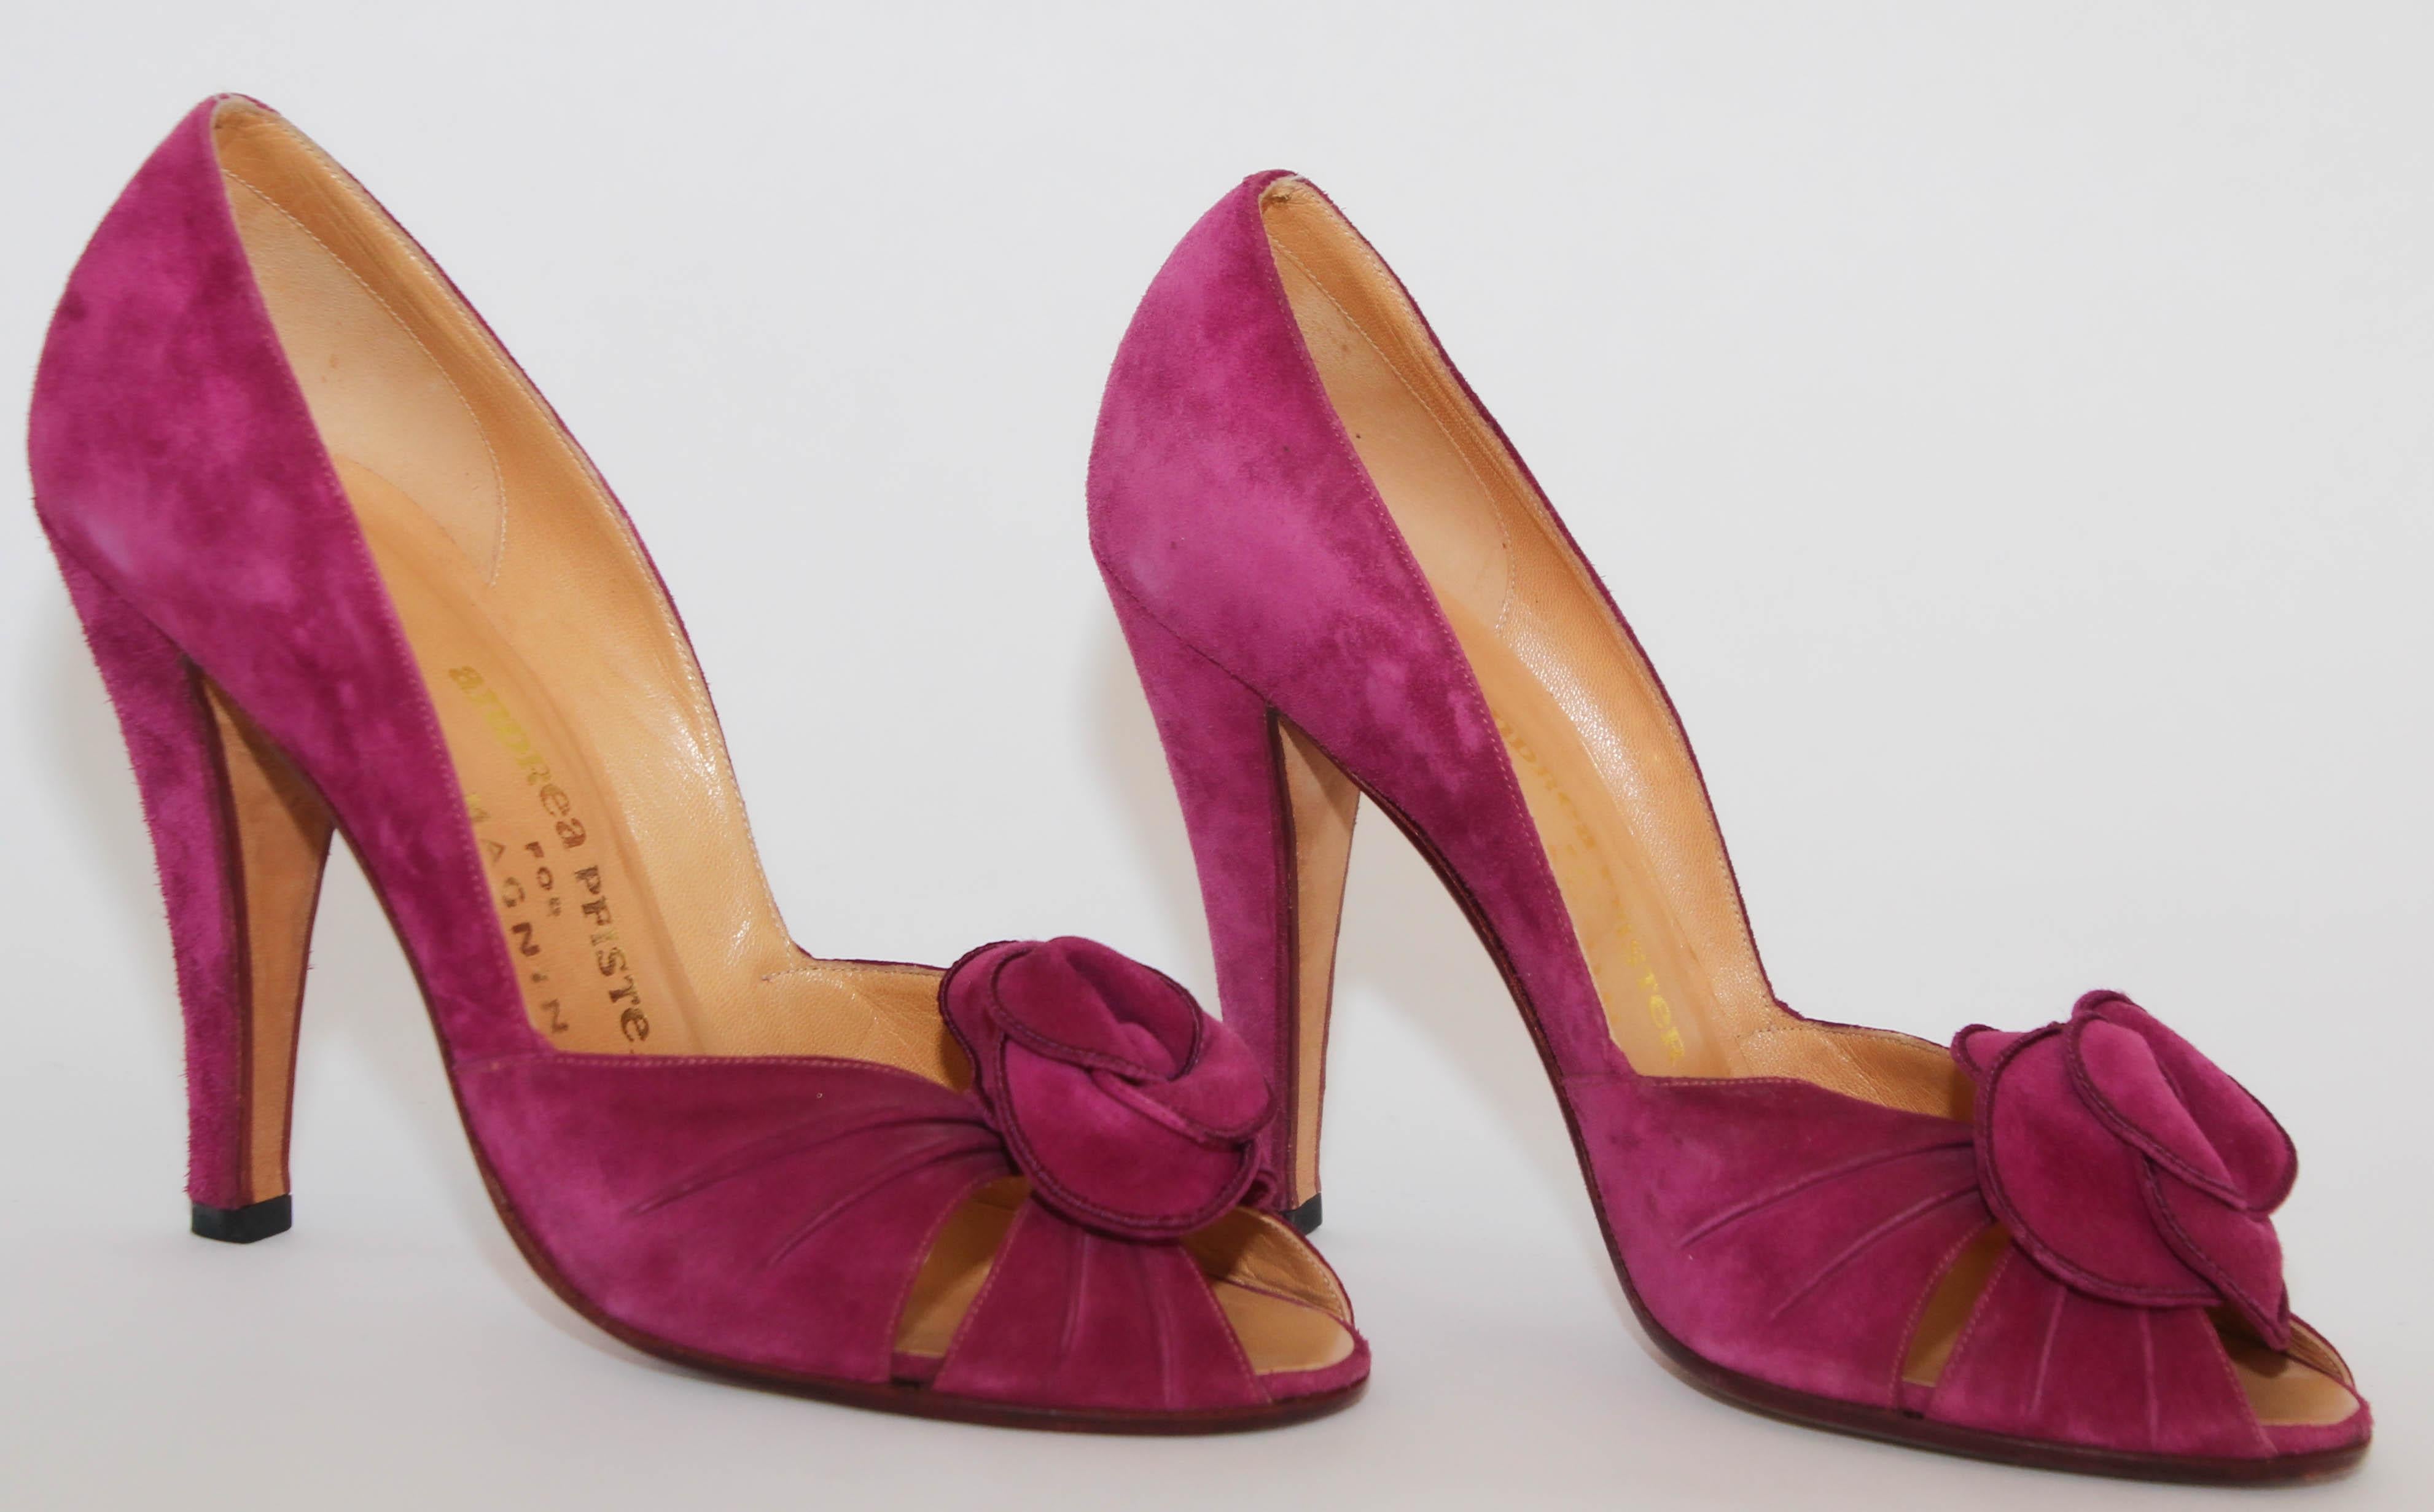 Beautiful suede pink leather pumps by Andrea Pfister for I Magnin.
Vintage Andrea Pfister heeled shoes from the 70/80s.
Great 1980's pink suede Andrea Pfister for I Magnin.
Chic Classic Elegant and Retro vintage pumps.
Made in Italy. Size US